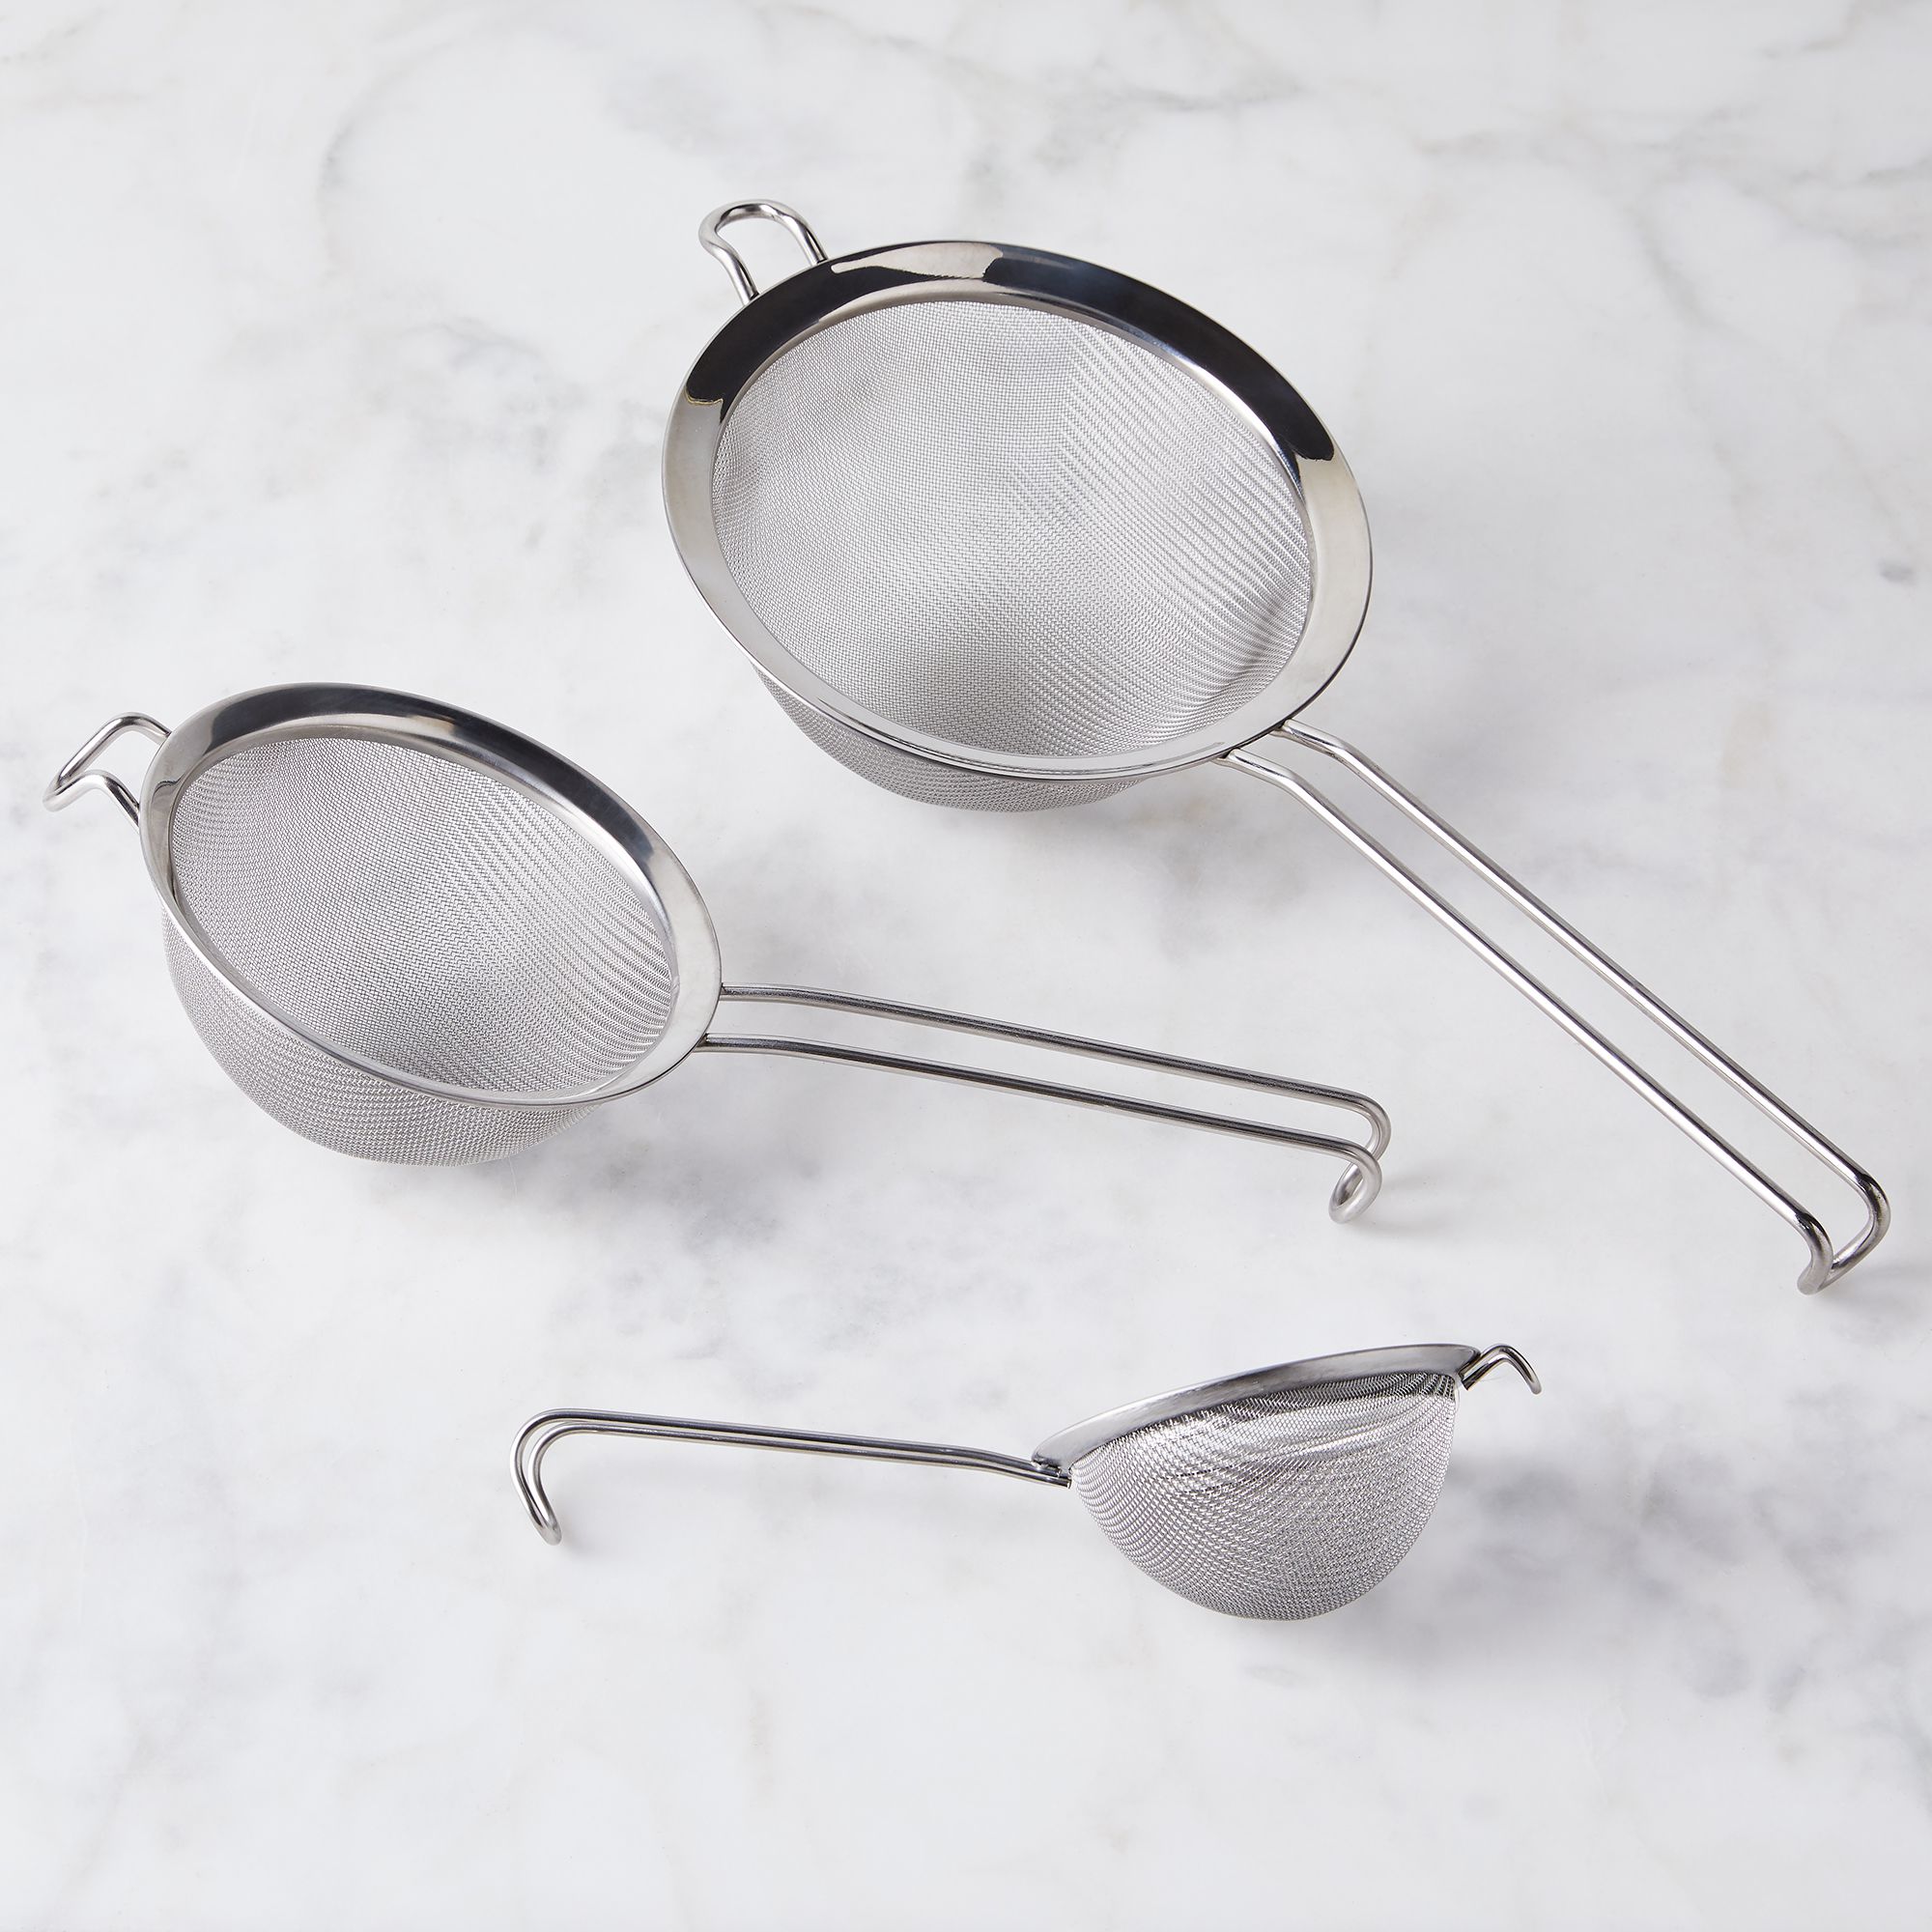 Details about   Fine Mesh Stainless Steel Strainers Premium Quality Set of 3 Food Strainer 